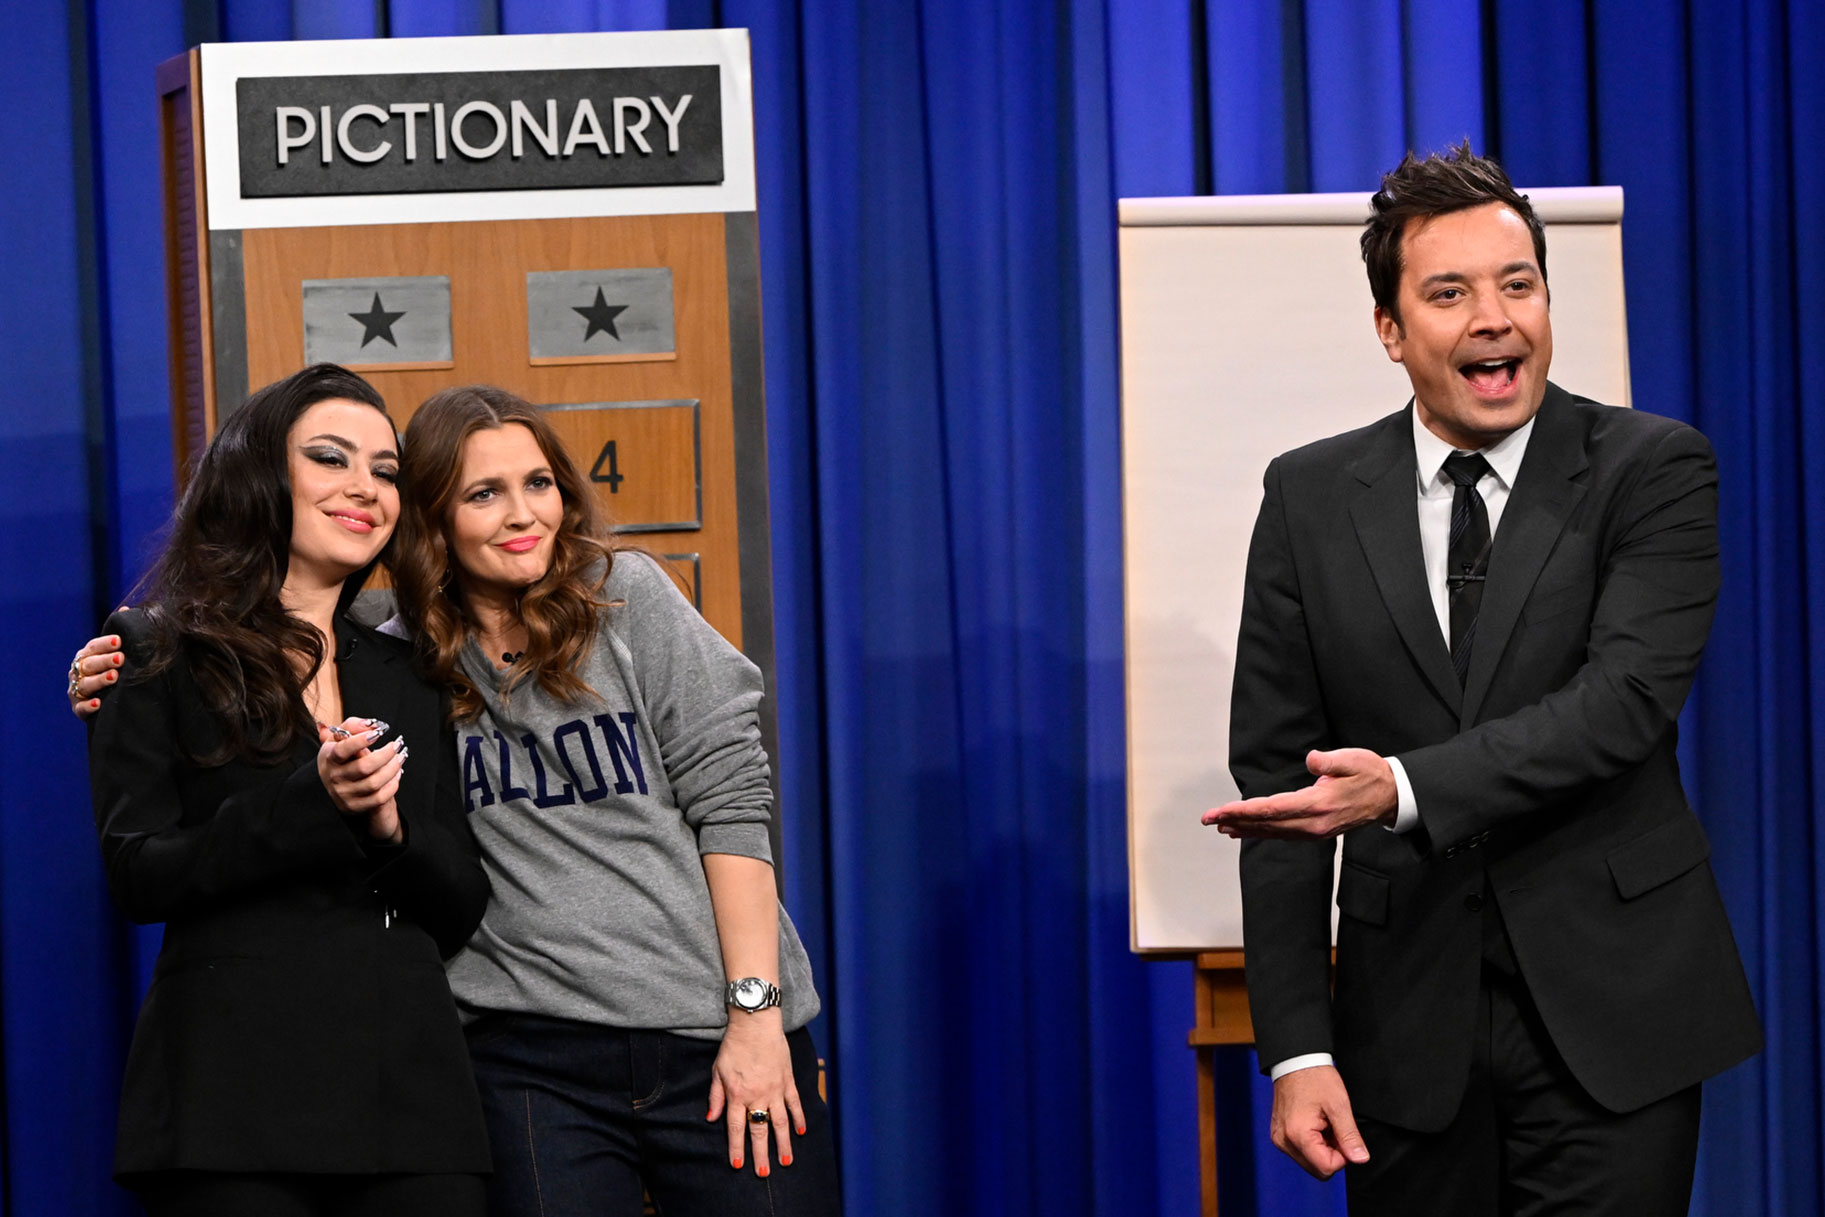 Charli XCX and Drew Barrymore embrace as Jimmy Fallon address the tonight show crowd